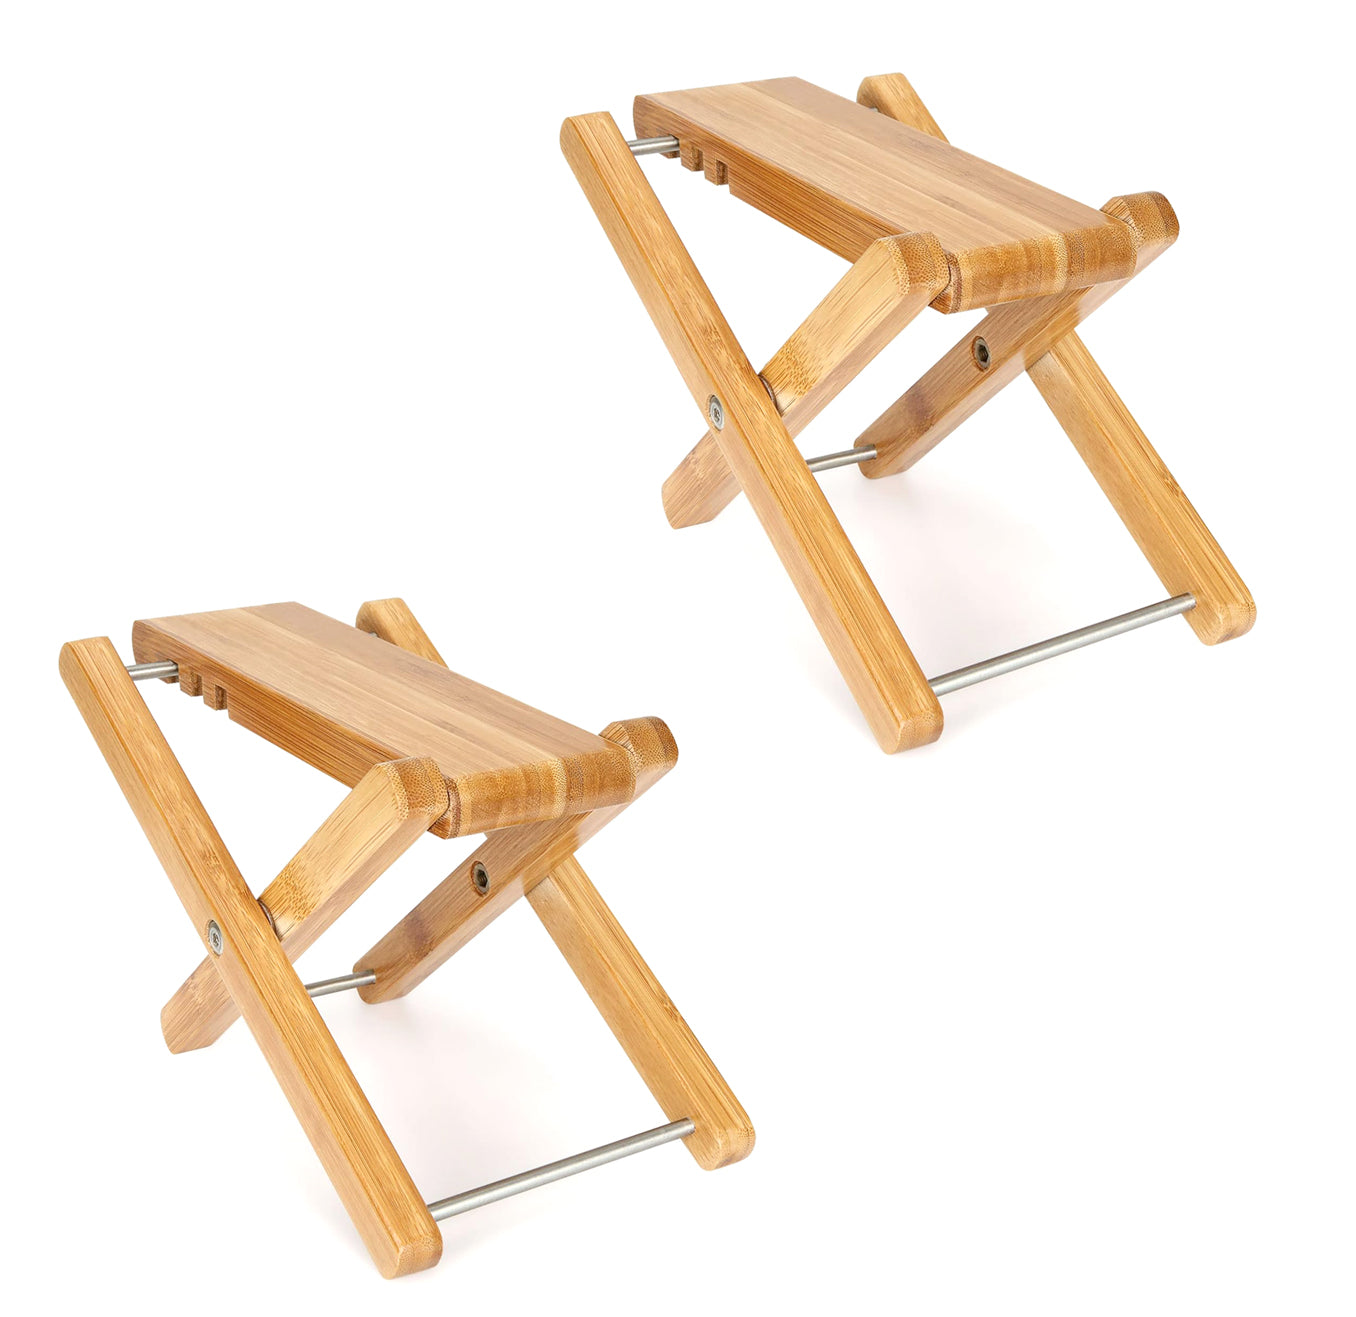 5 Core 2Pieces Wood Guitar Footstool/ 3-Position Height Adjustable Guitar Foot Stand/ Solid Wood Folding Footstool/ classical guitar foot stool, guitar leg support - GFS WD 2PCS